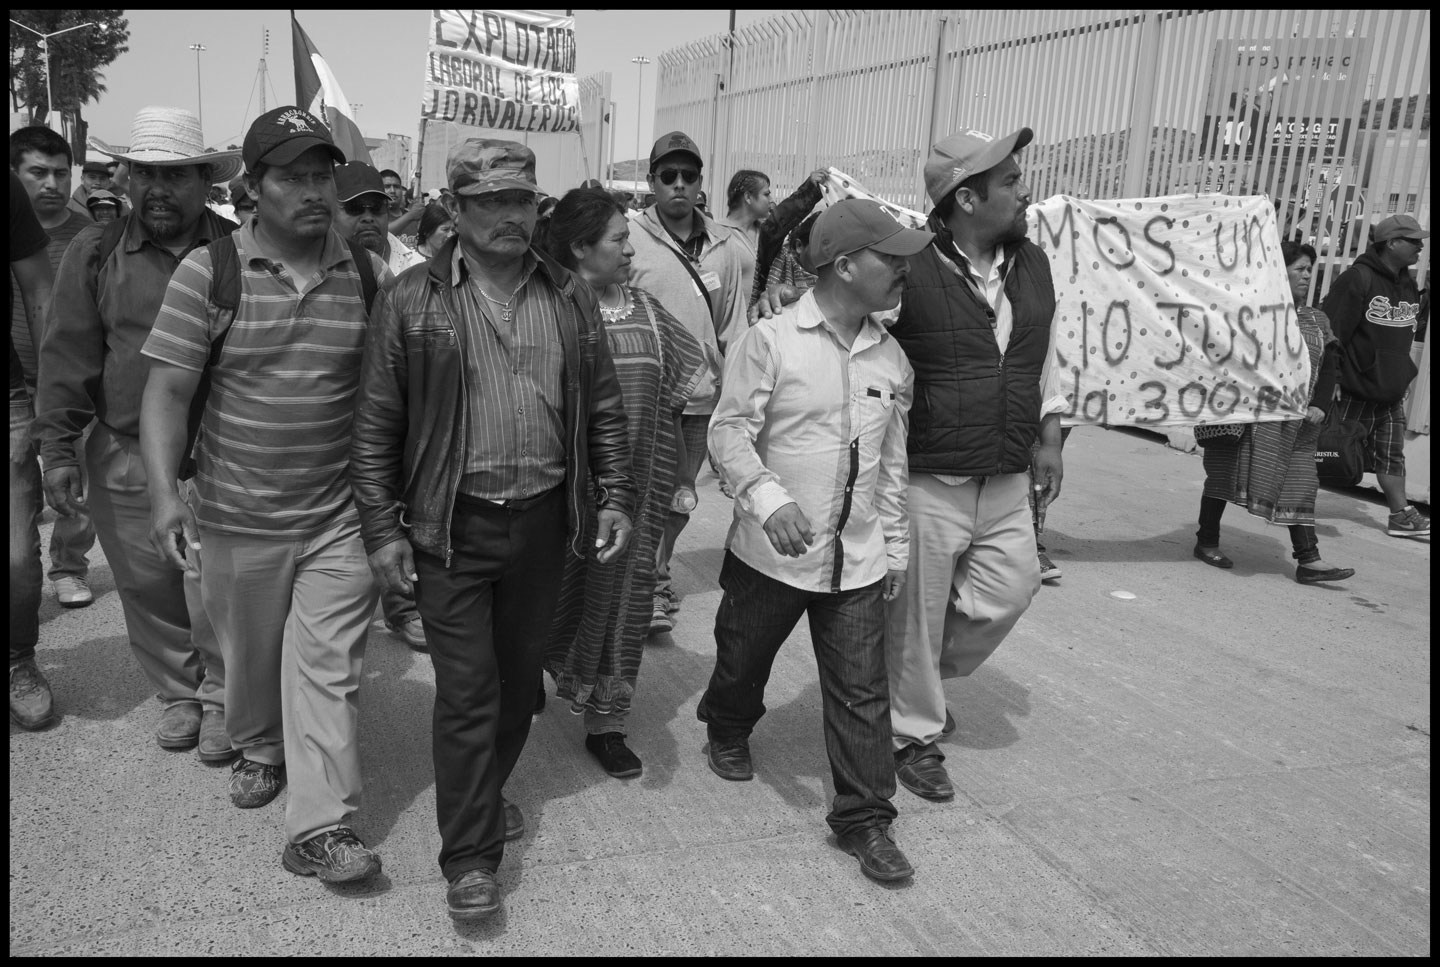 The leaders of the striking farm workers in San Quintin Valley took busses to the US-Mexico border to draw attention to the fact that the tomatoes and strawberries they pick are exported to the US.